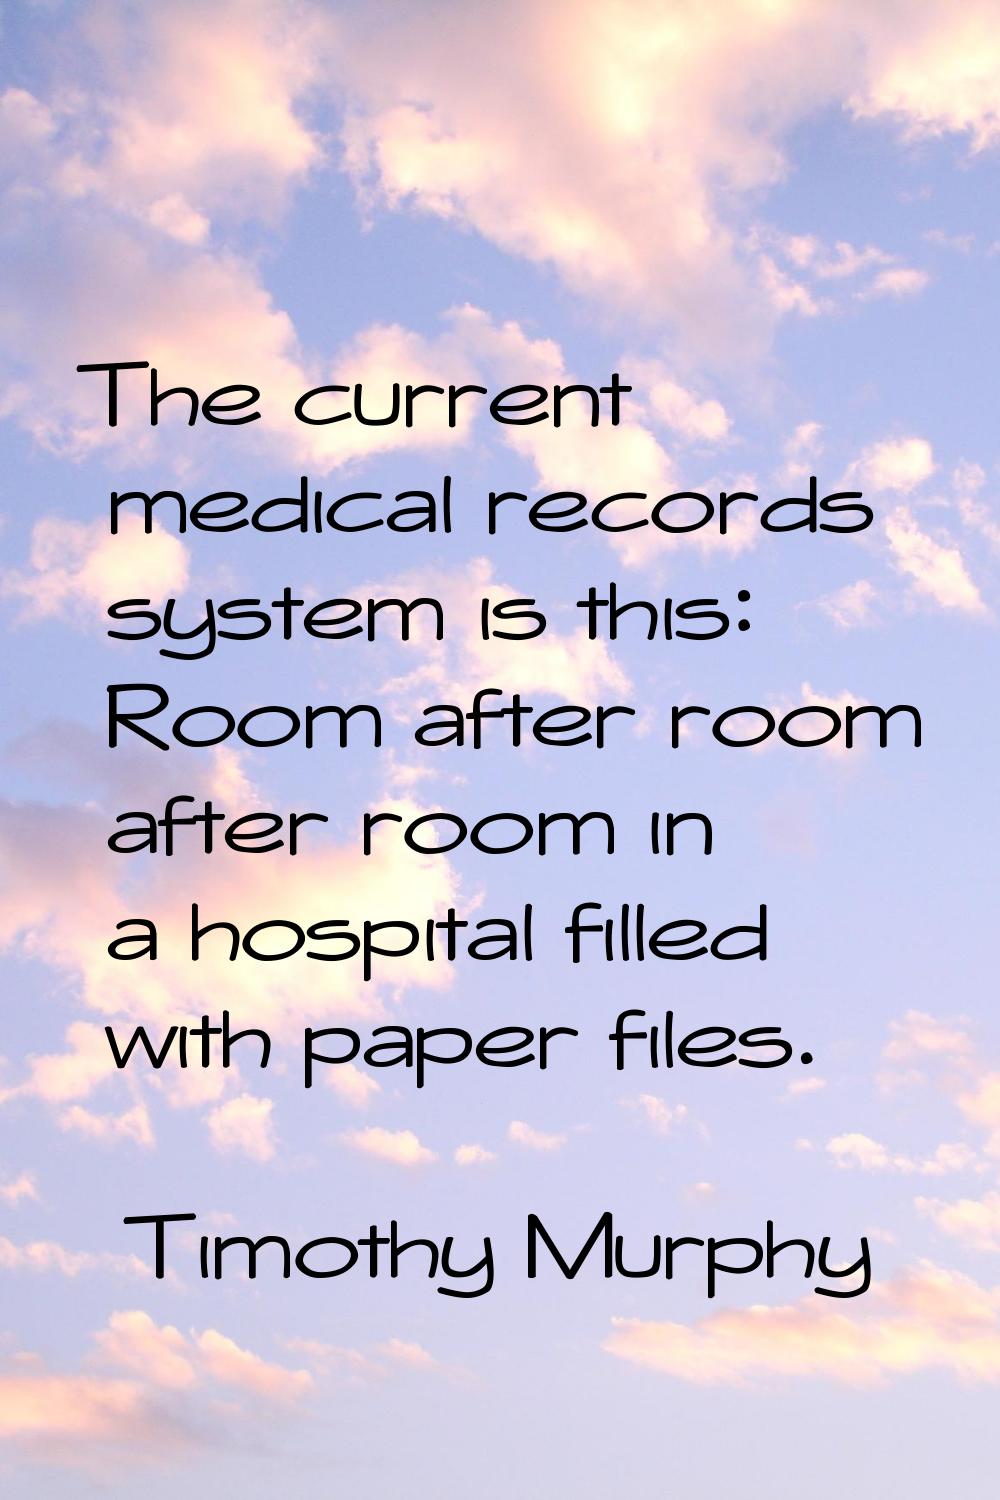 The current medical records system is this: Room after room after room in a hospital filled with pa